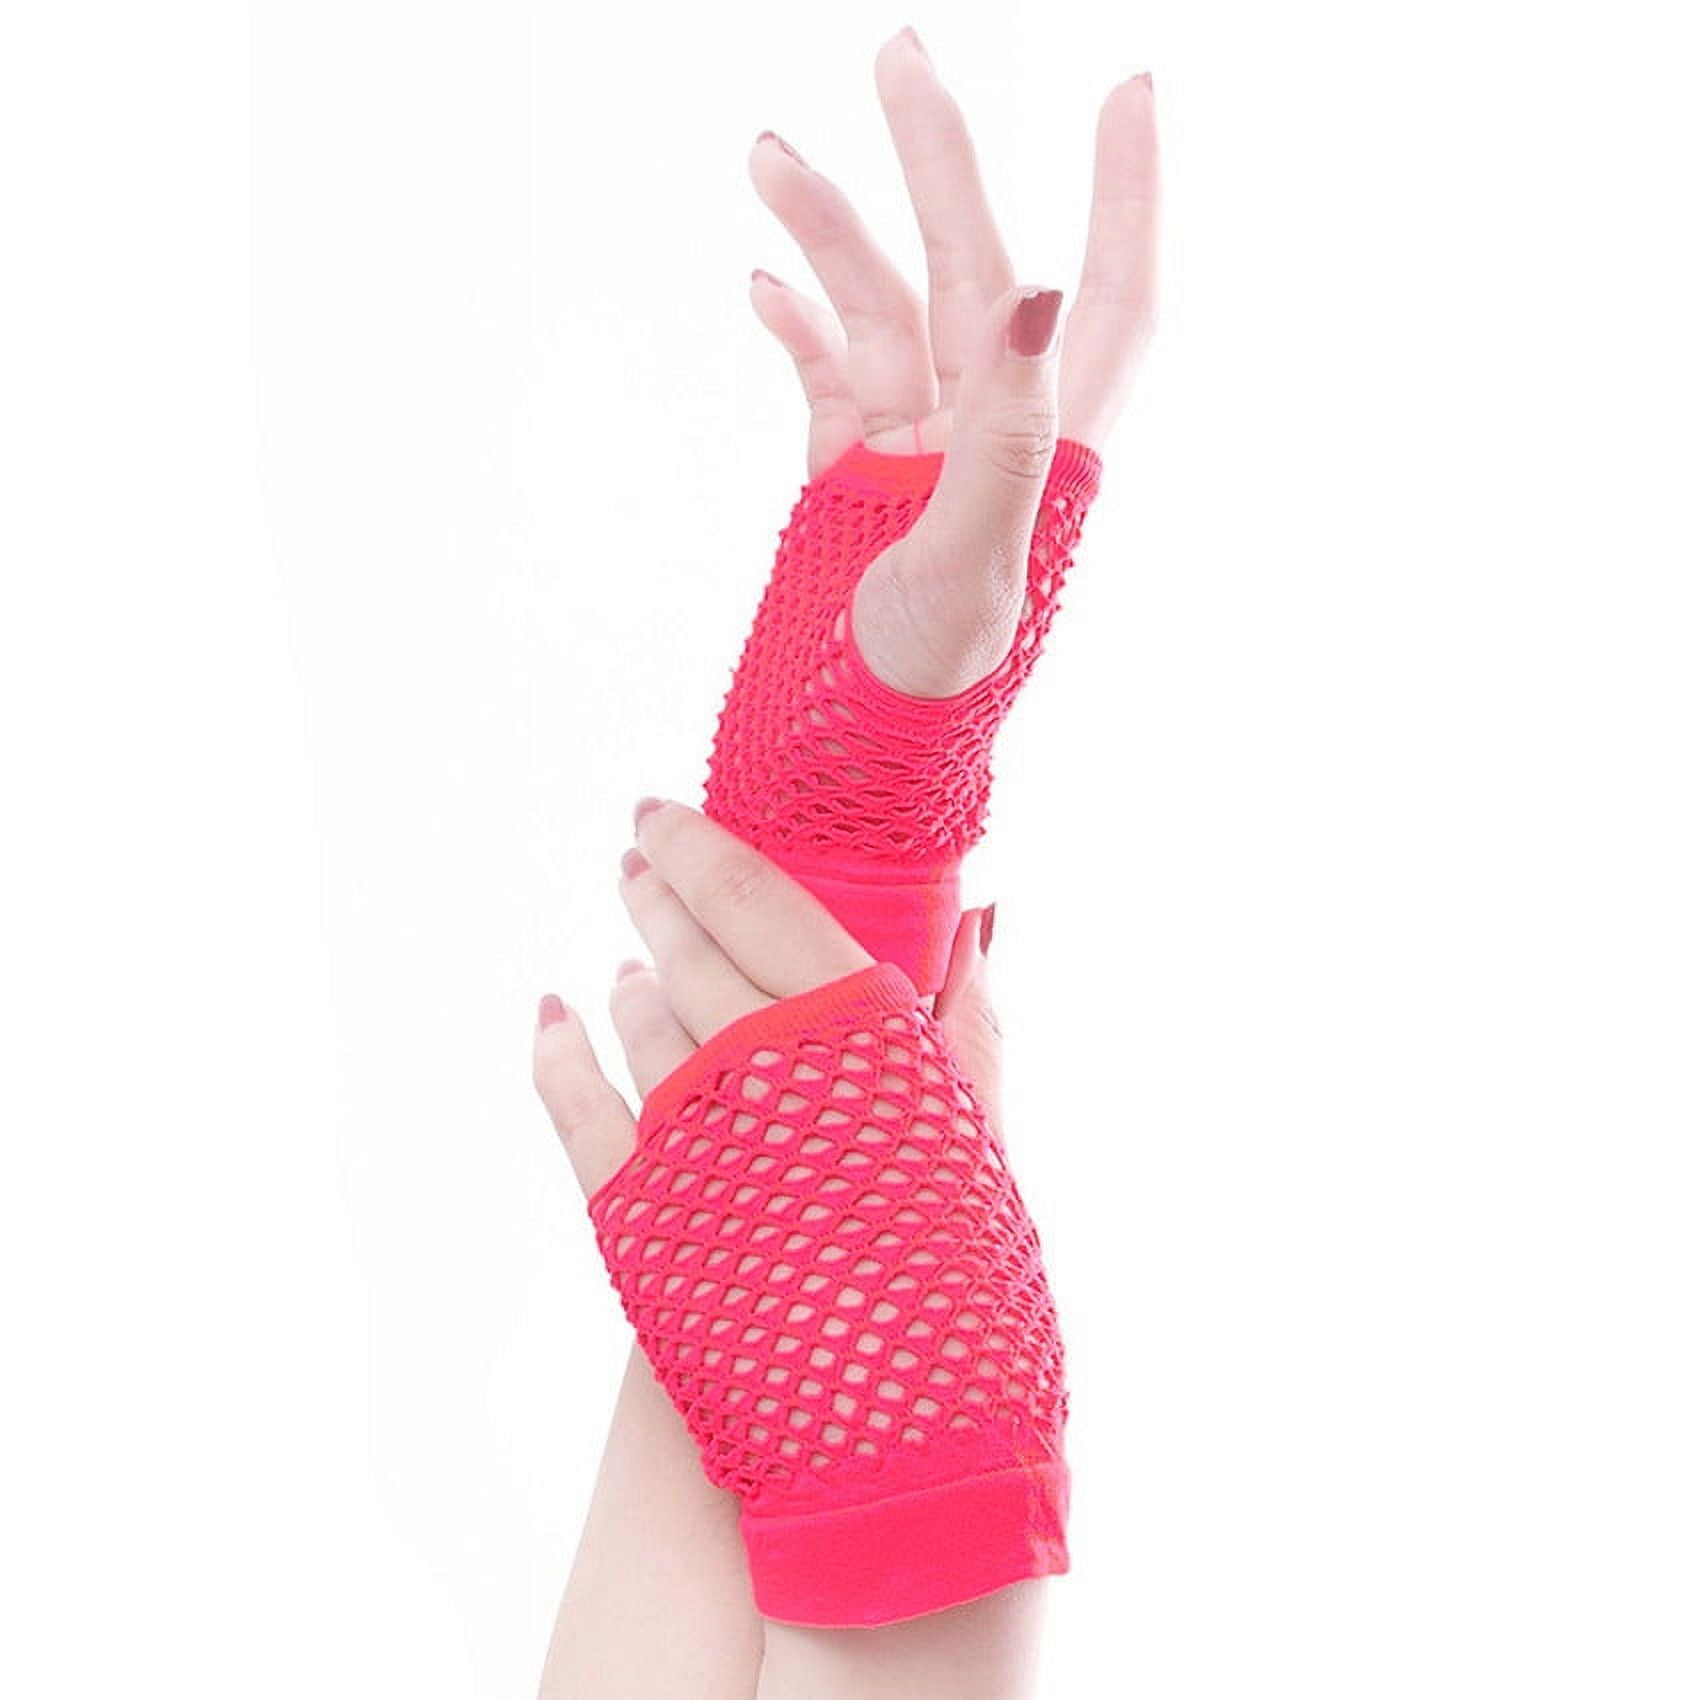 yuehao punk goth lady disco dance lace fingerless mesh fishnet gloves hot  pink 